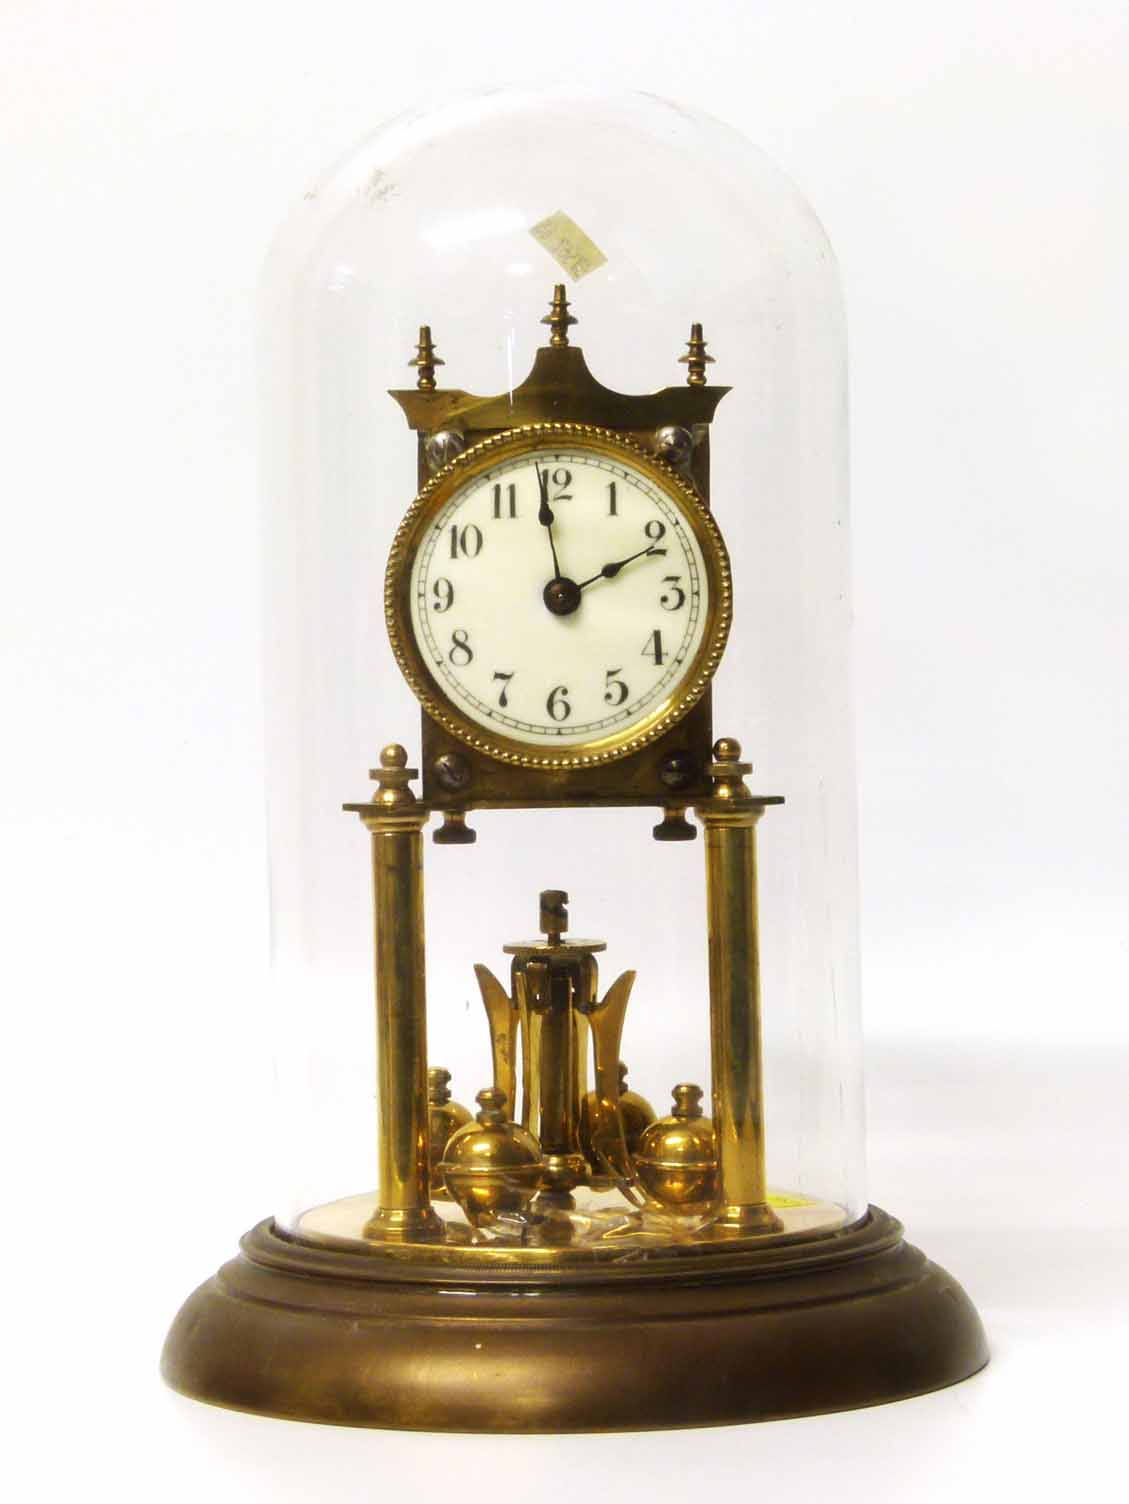 Torsion clock No condition reports for this sale.